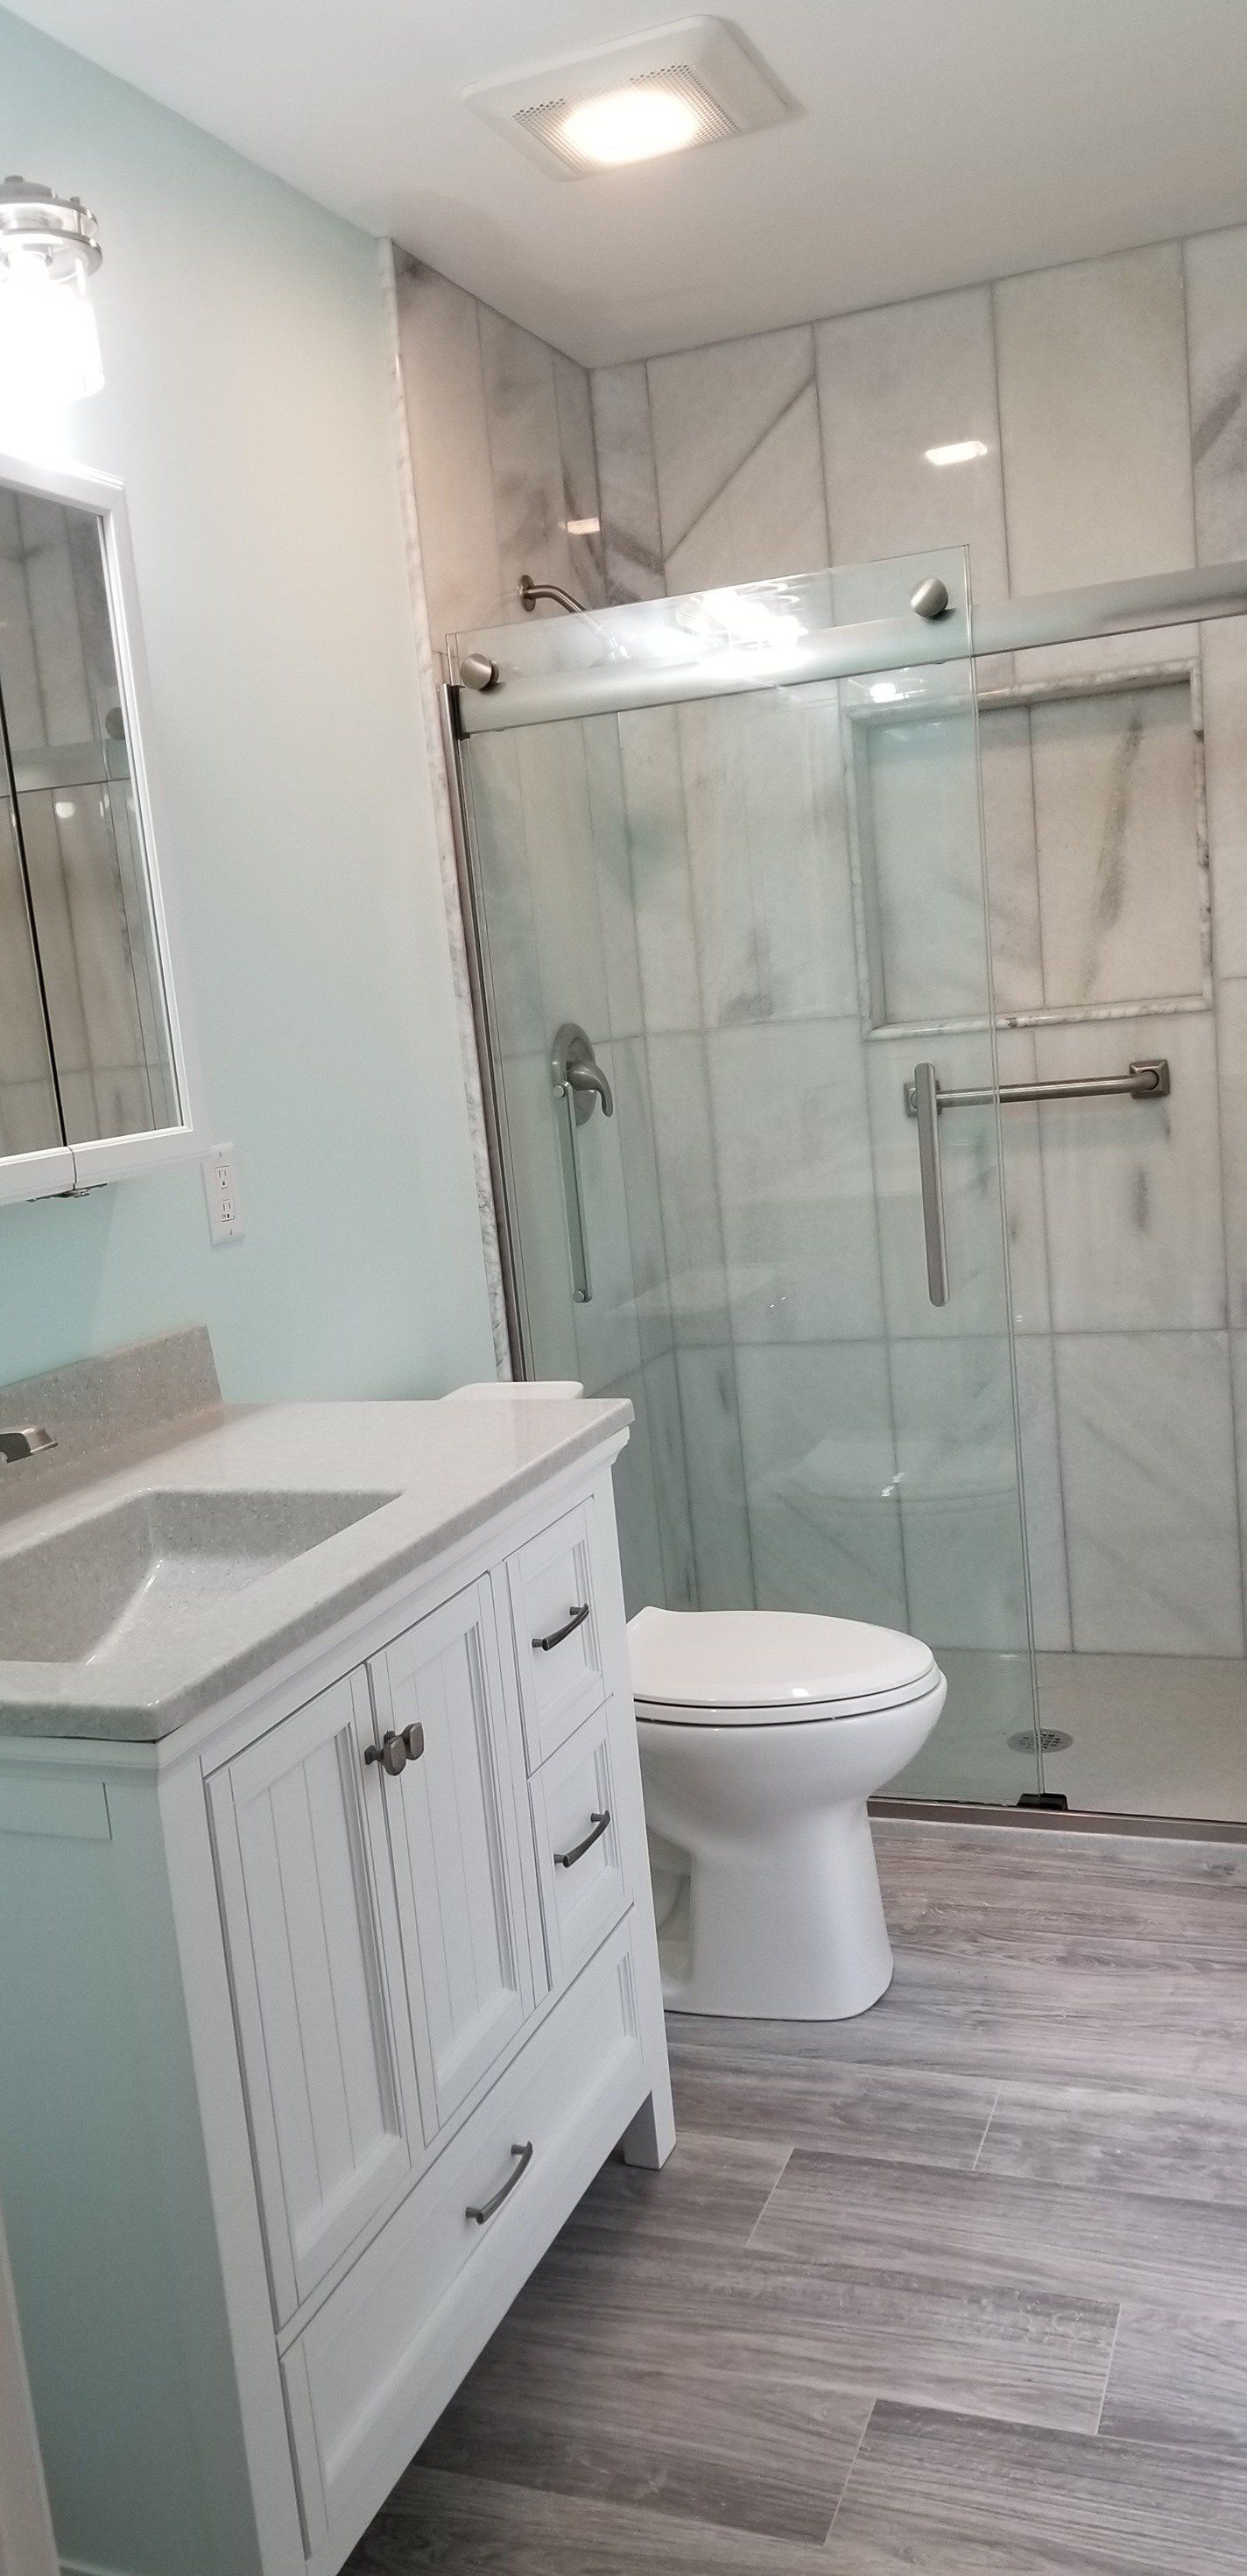 Remodeled bathroom with glass shower